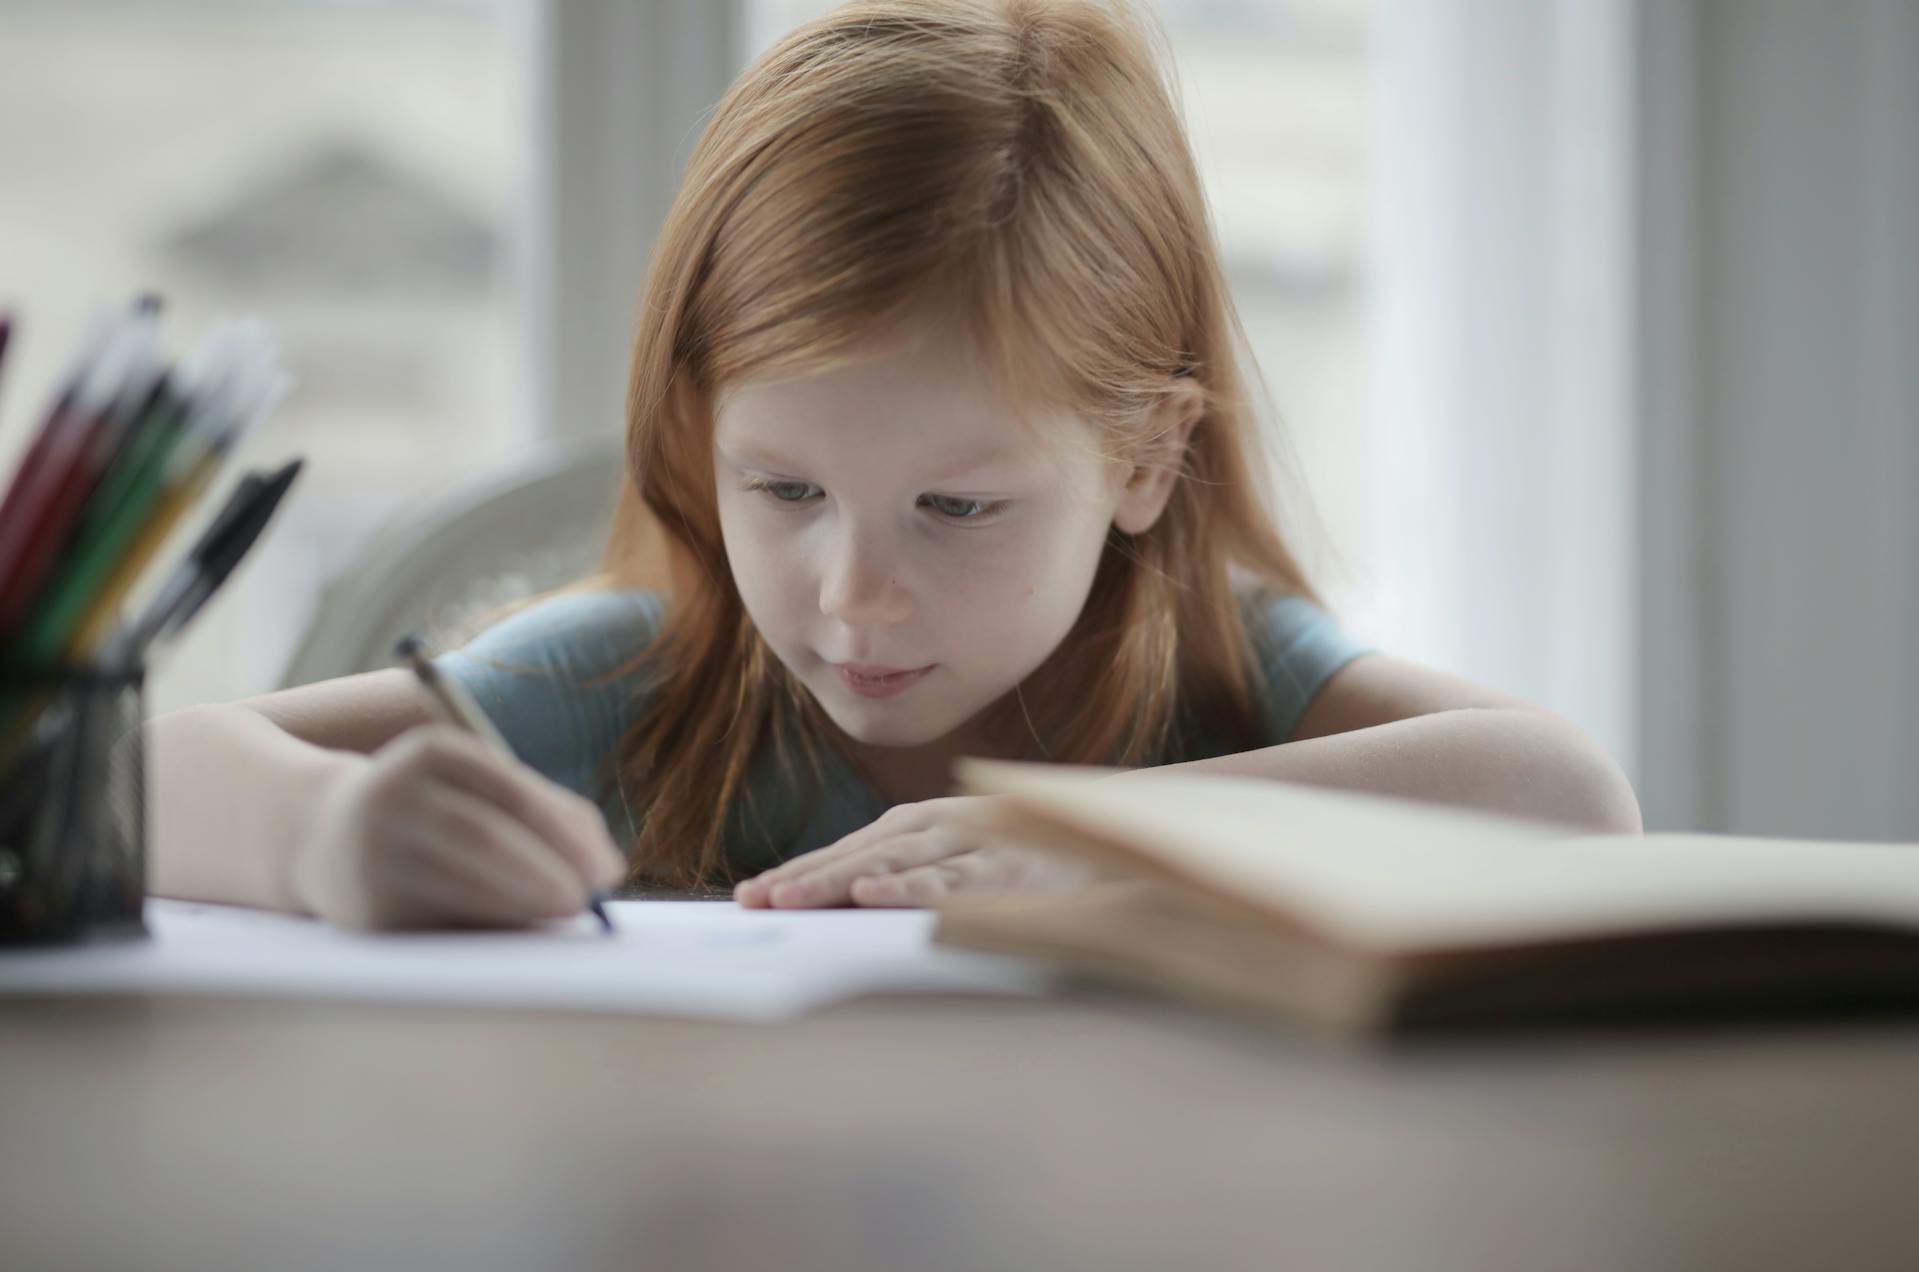 A little girl drawing something on a piece of paper | Source: Pexels